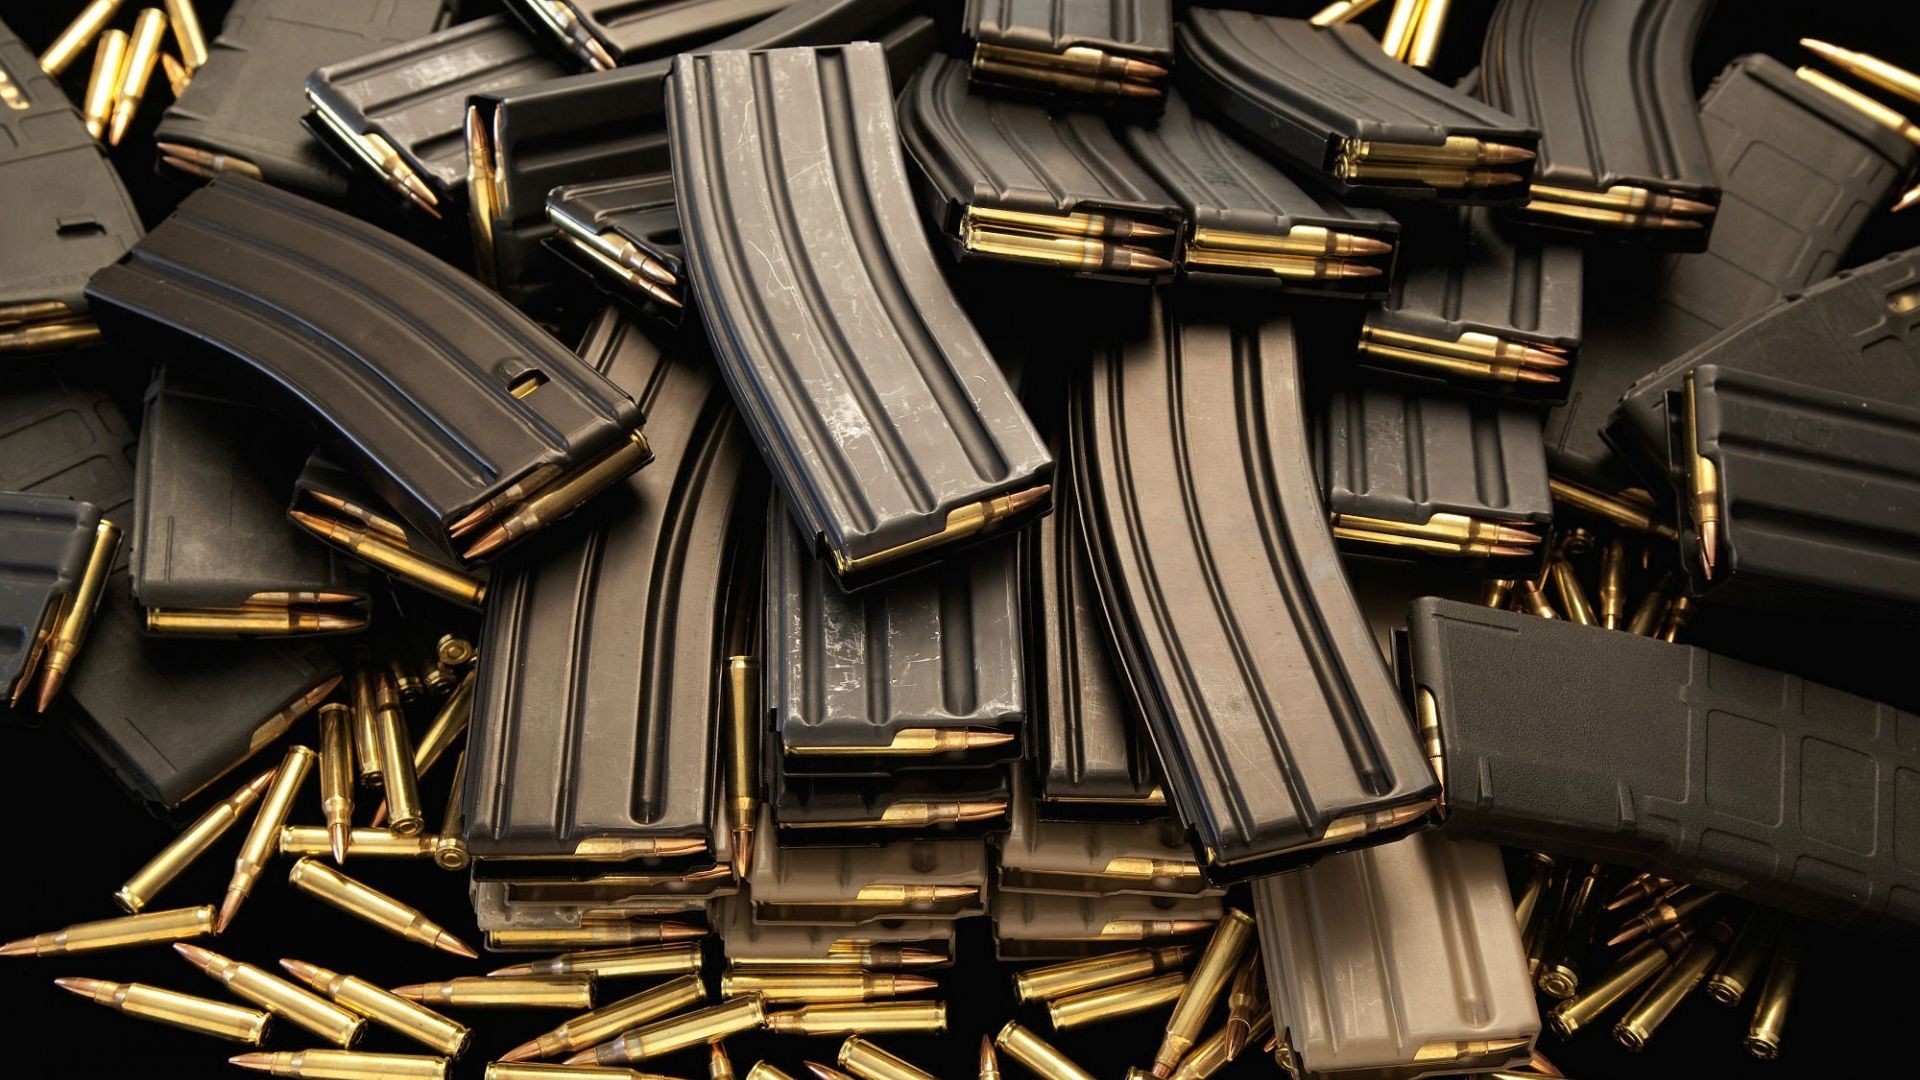 Free download weapons guns ammo ammunition military police wallpaper background [2000x1333] for your Desktop, Mobile & Tablet. Explore Ammo Wallpaper. Winchester Wallpaper, Bullets Wallpaper, Aria The Scarlet Ammo Wallpaper